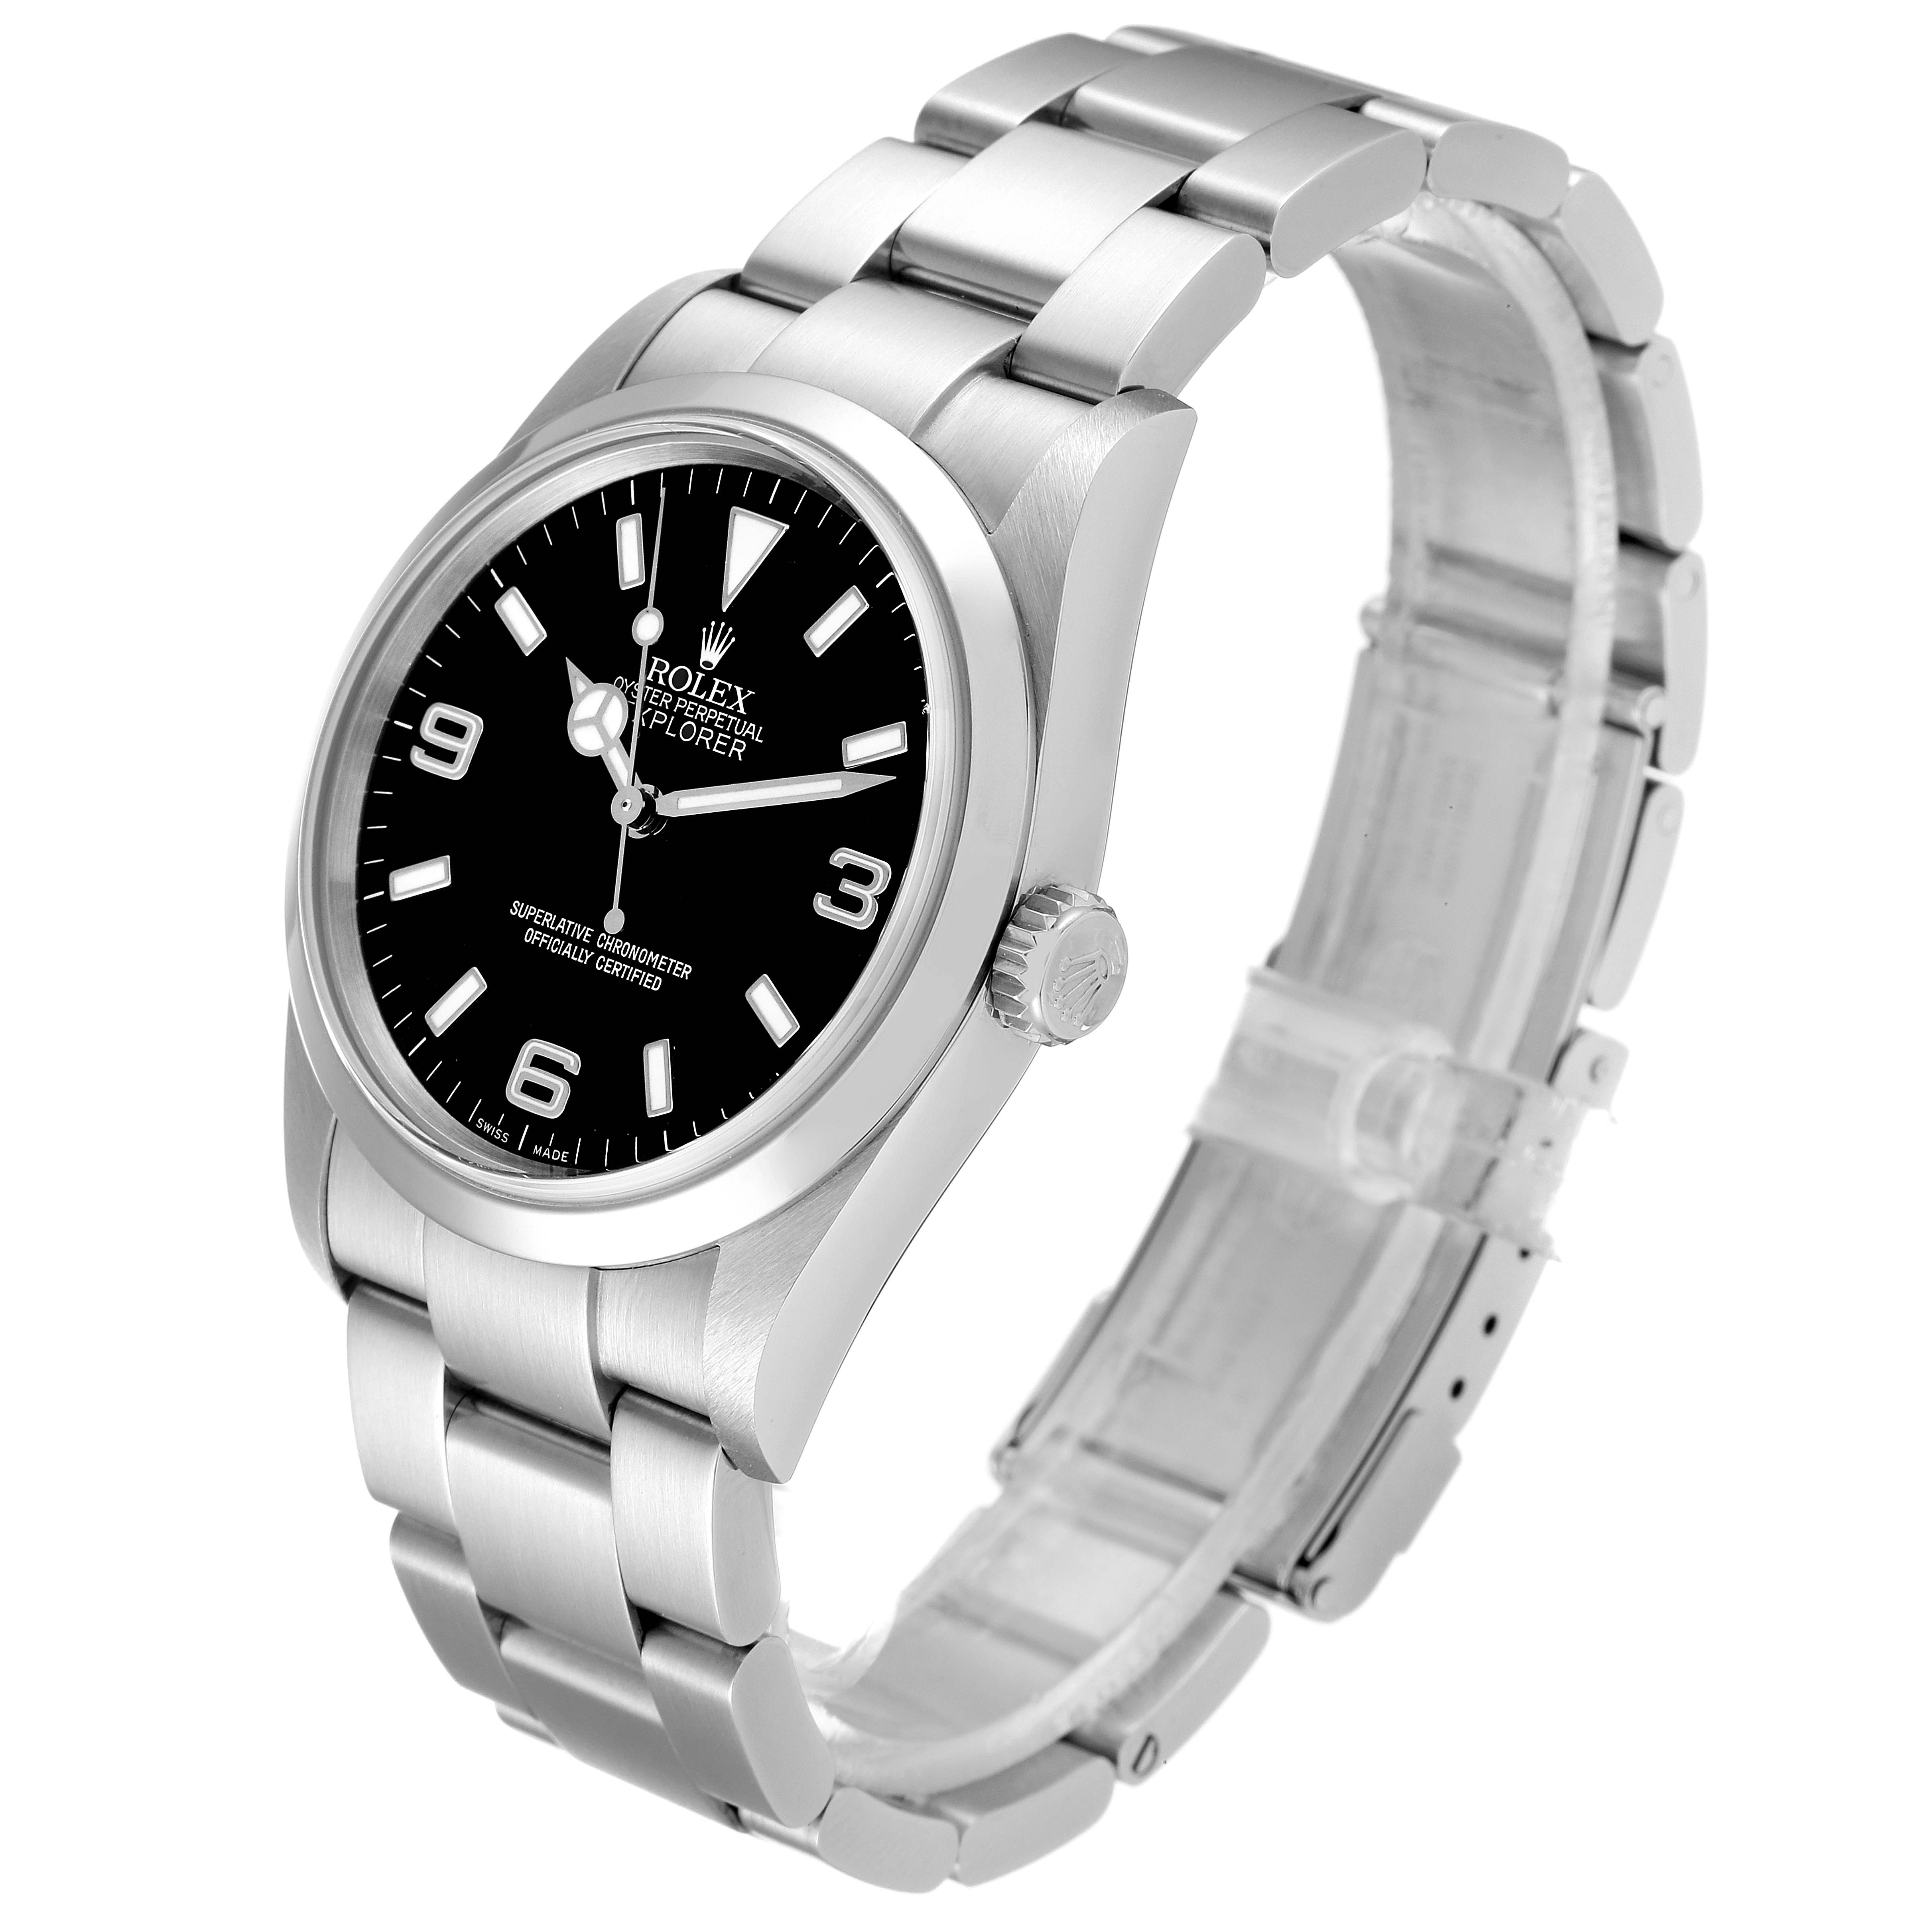 Rolex Explorer I Black Dial Stainless Steel Mens Watch 114270 Box Card ...